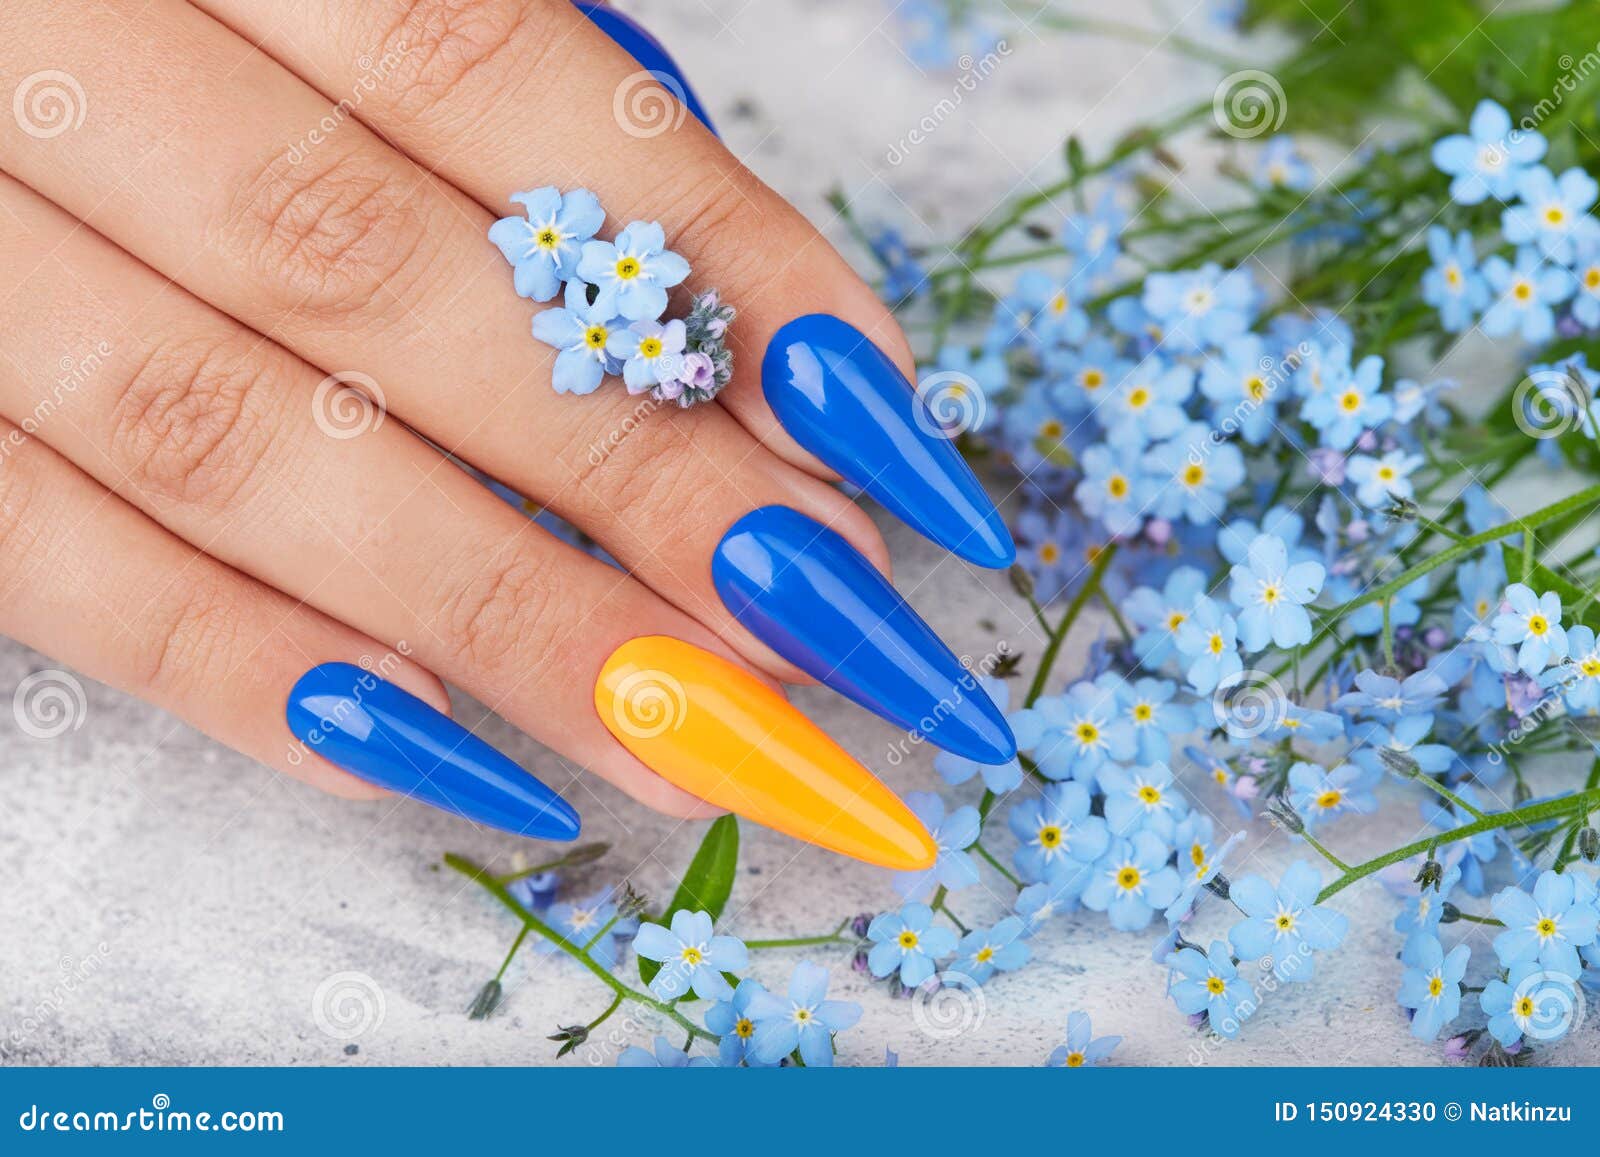 hand with long artificial manicured nails colored with blue and orange nail polish